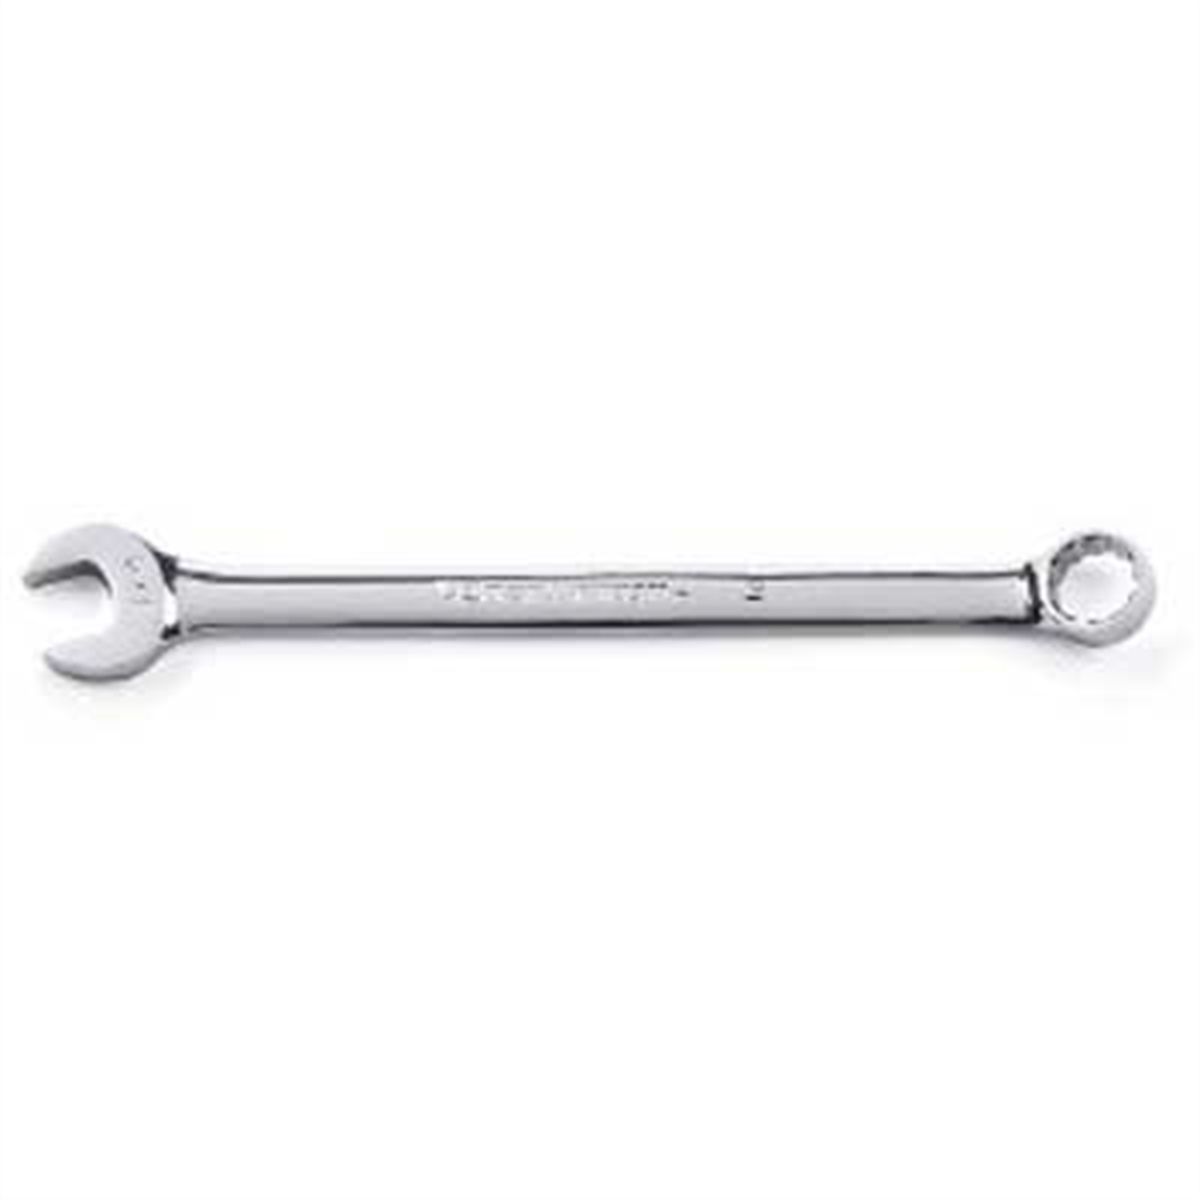 7/8" Long Pattern Combination Wrench SAE